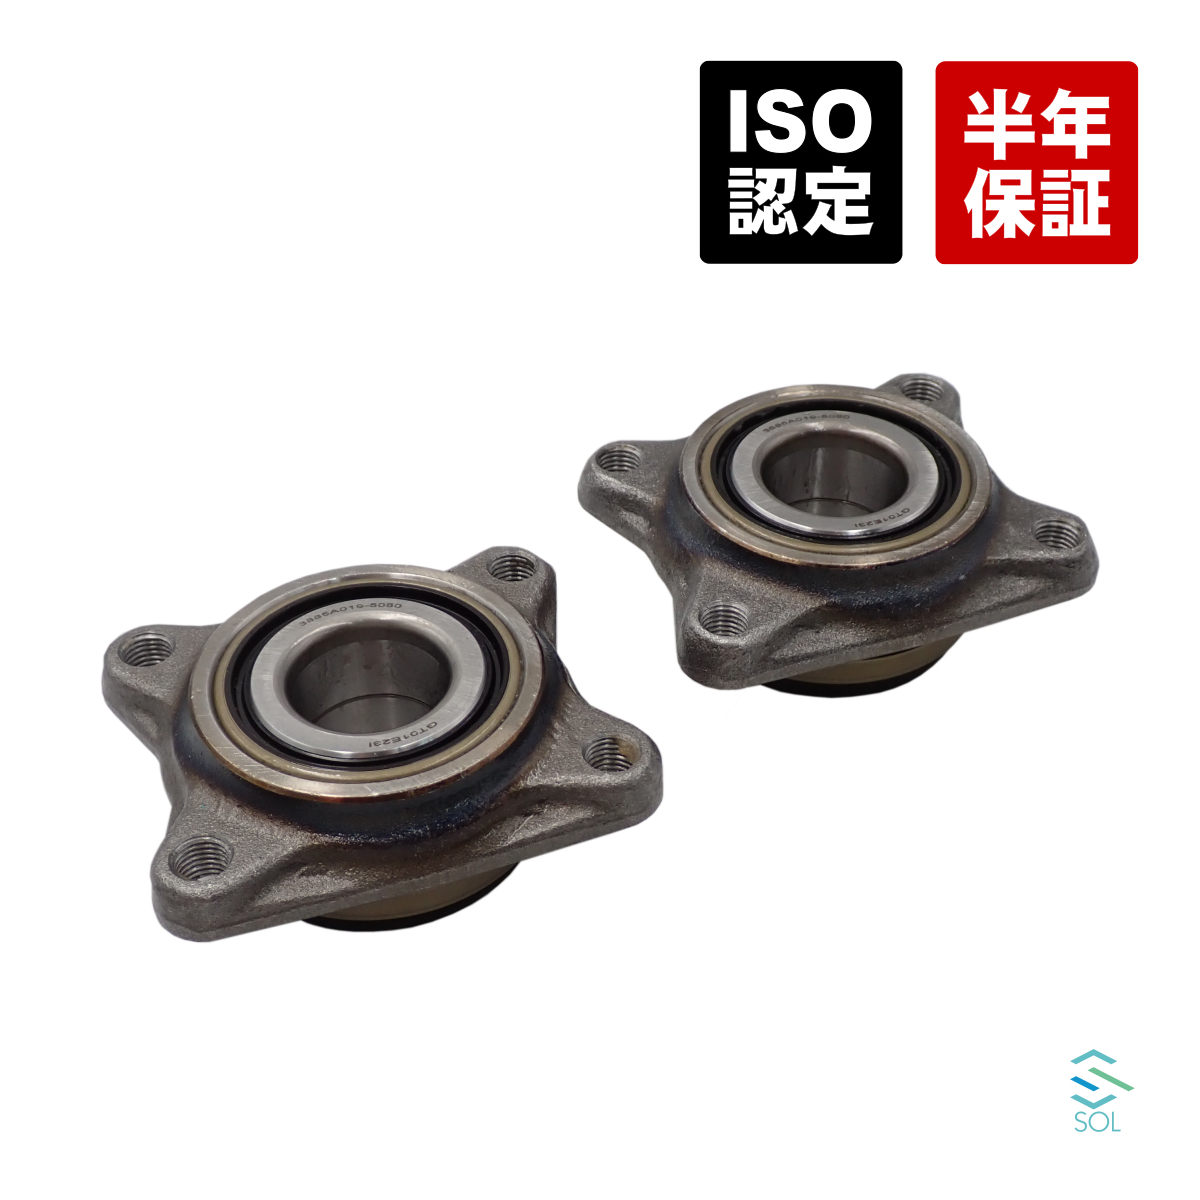  Mitsubishi Toppo H41A H42A H43A H46A H47A H48A H42V H47V front hub bearing left right set 3885A019 3885A002 MR519730 MR319142